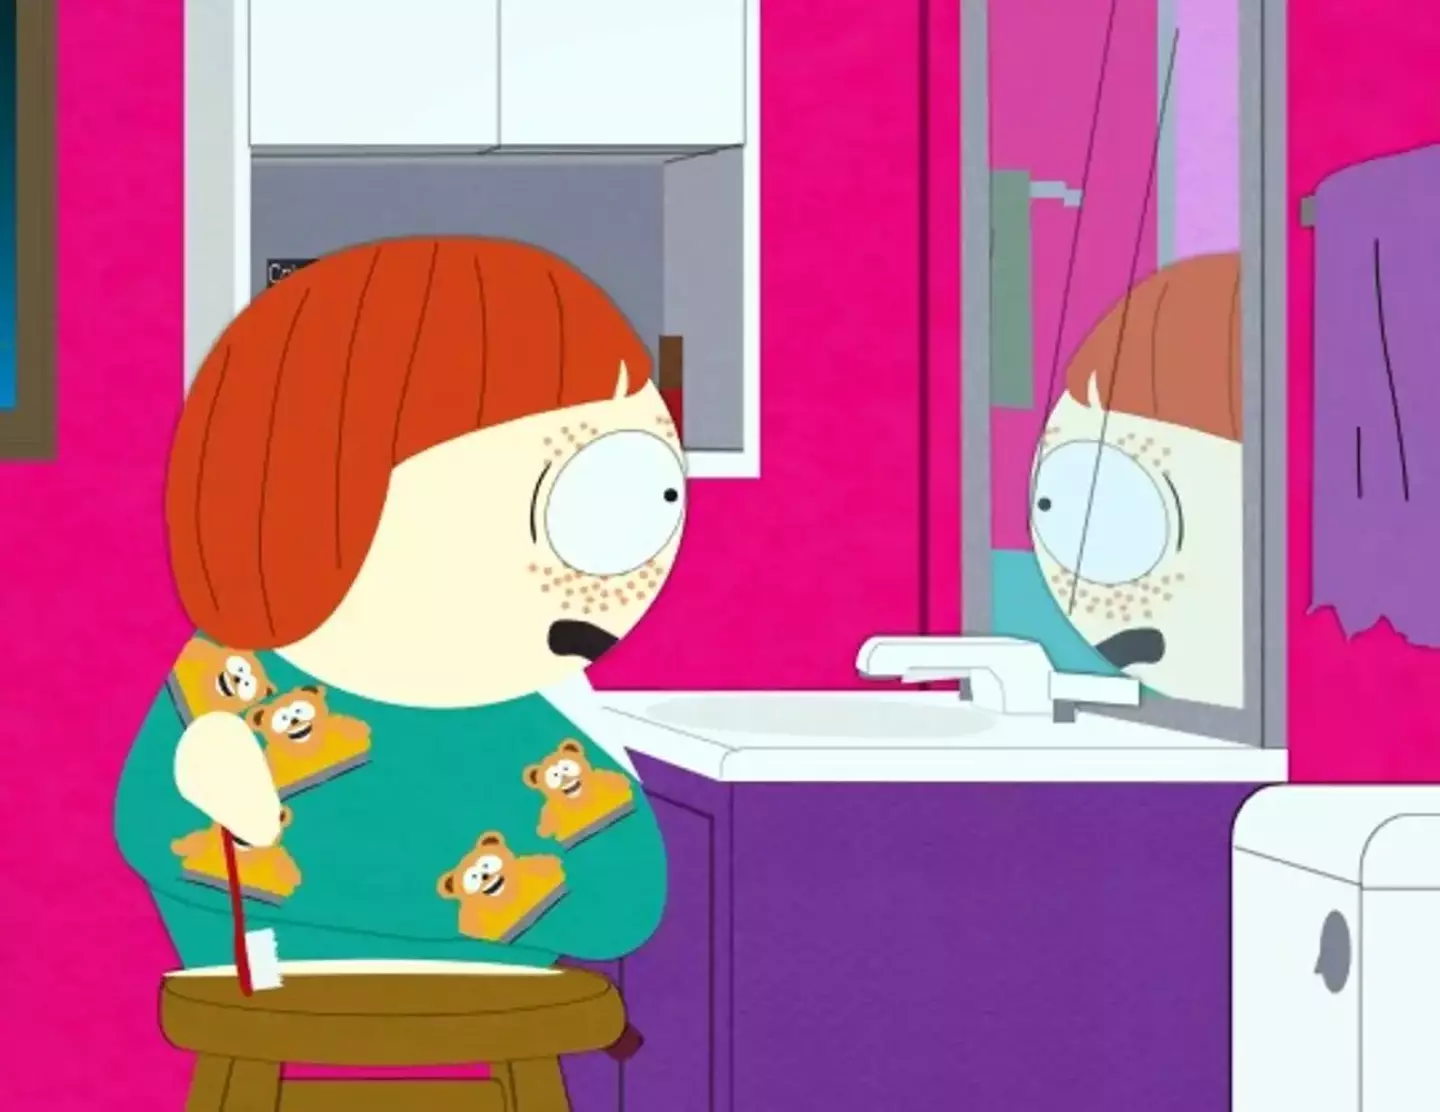 South Park's 'Ginger Kids' episode supposedly 'ruined' Ed Sheeran's life.